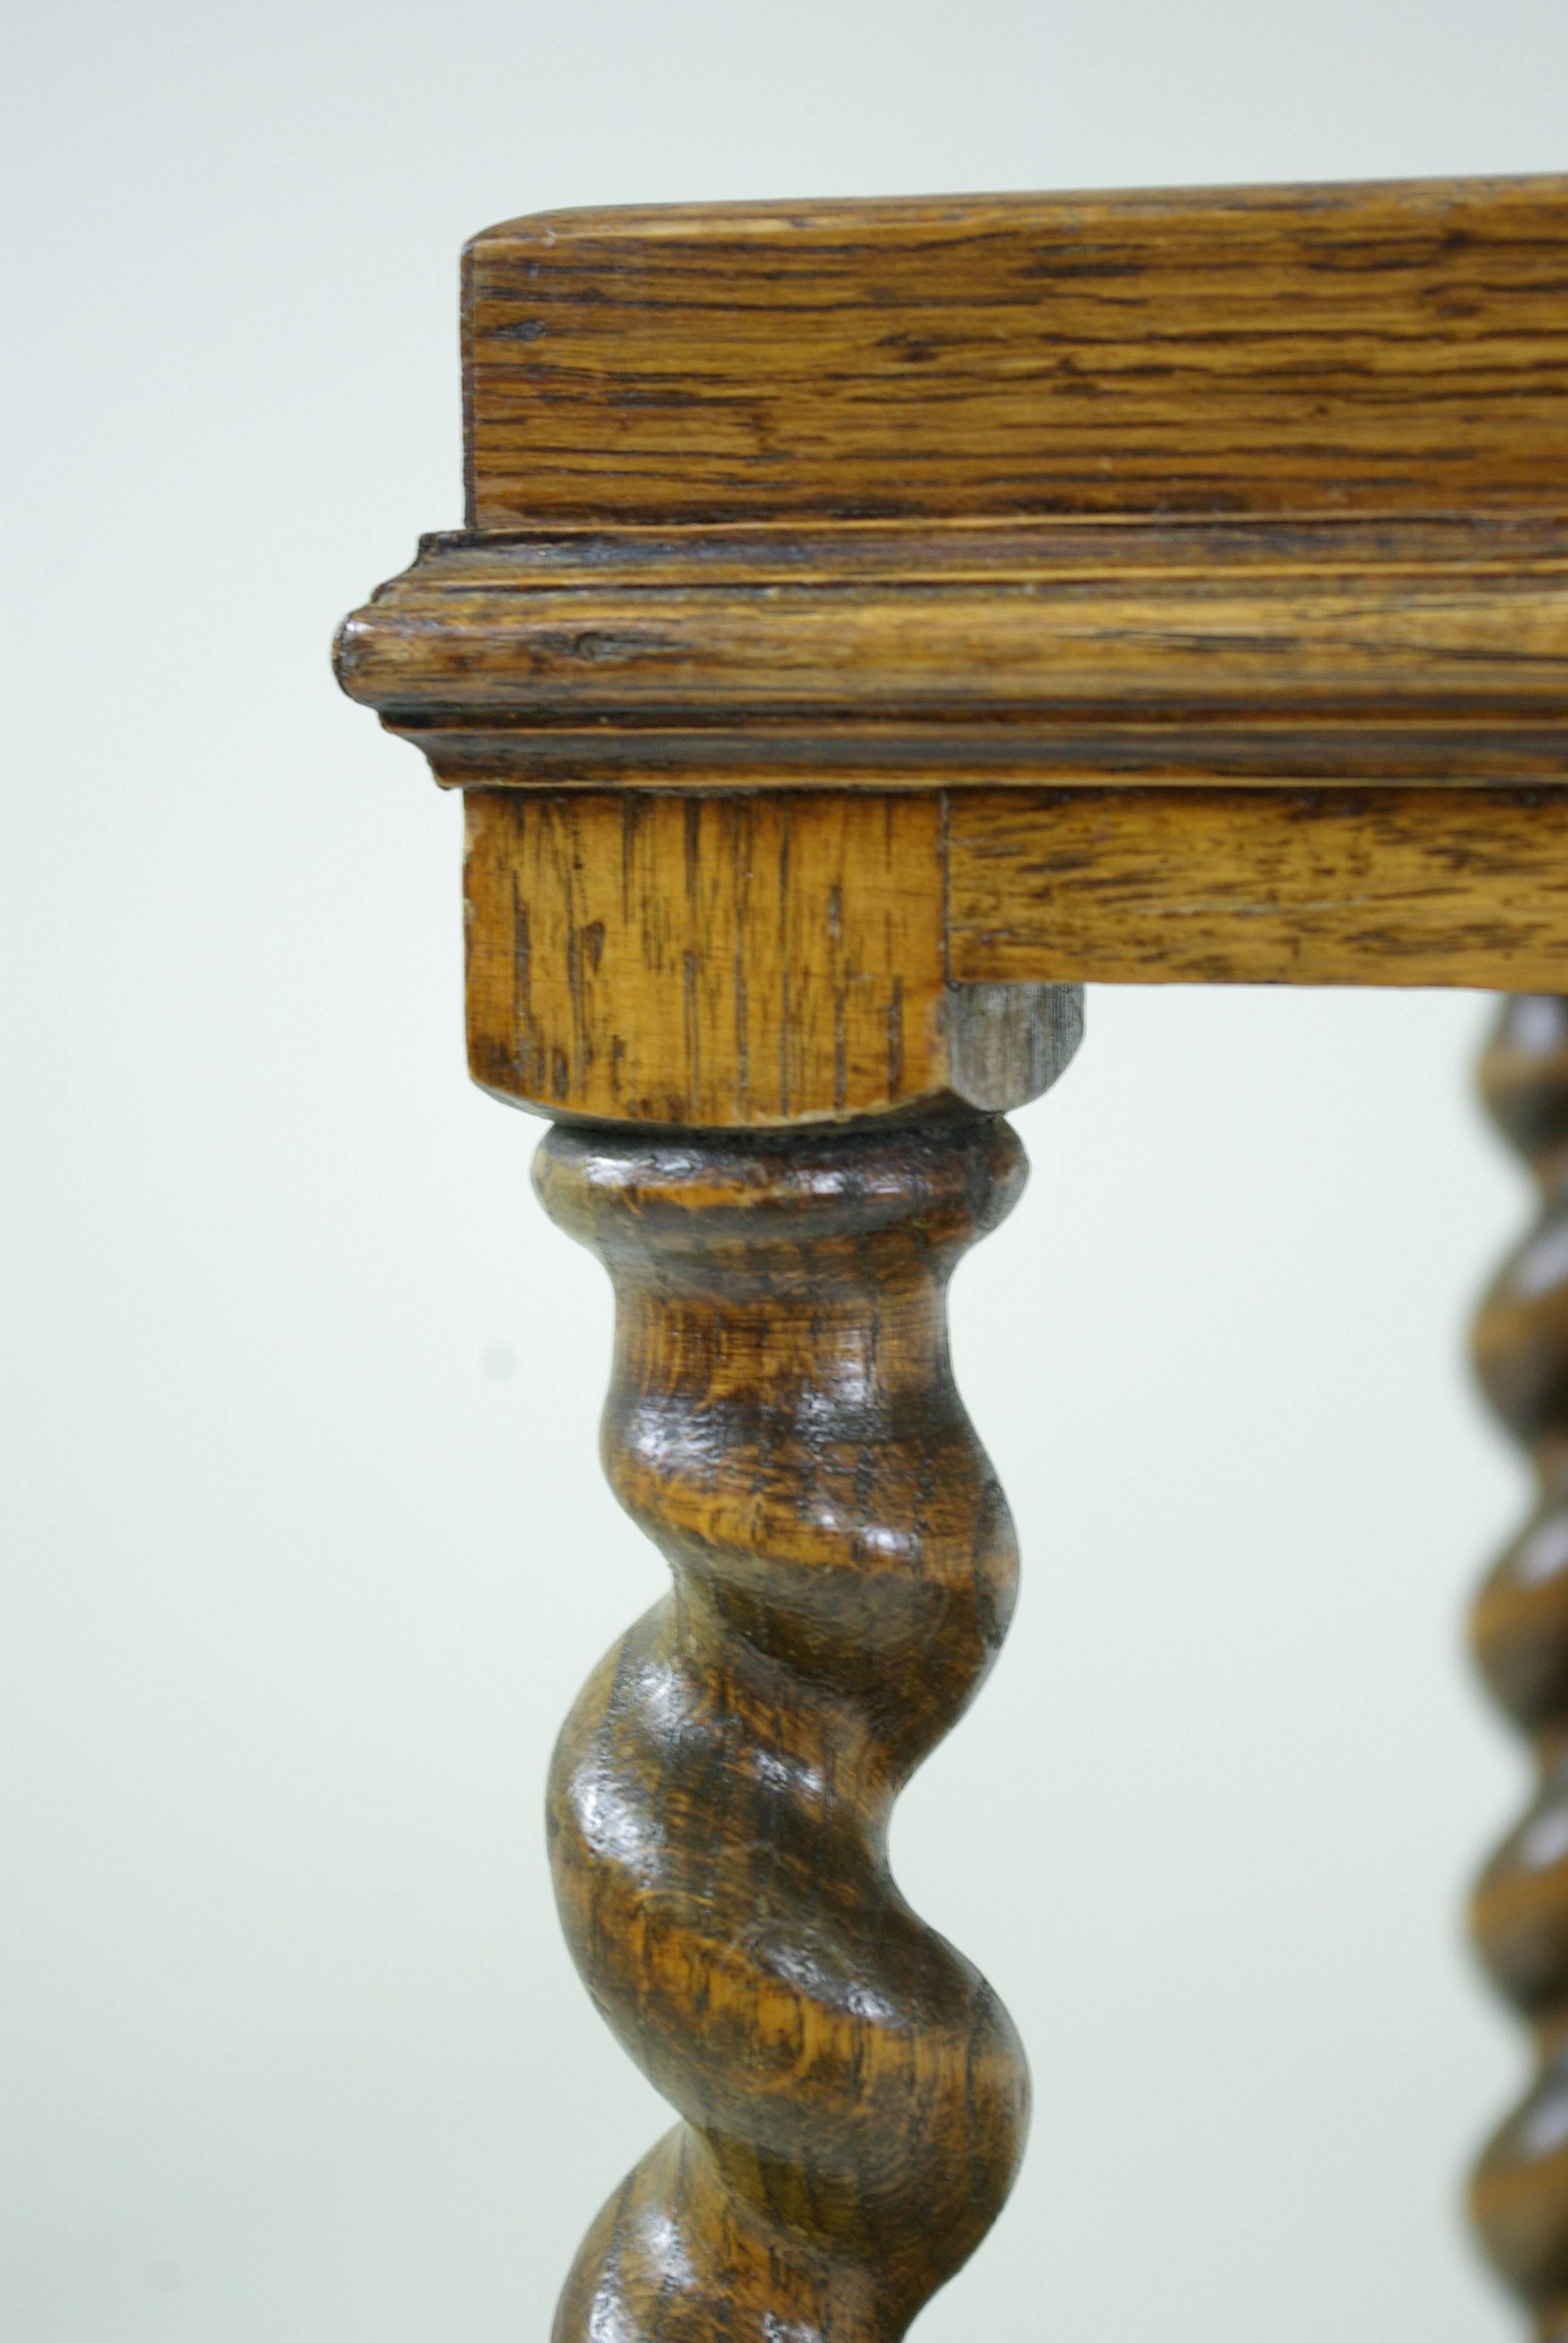 Scotland, 1920.
Solid oak construction.
Thick barley twist supports.
Original finish, warm patina.
All joints are solid.
Wonderful piece of furniture.

$850.

Lot B-264.
Measures: 36 1/2